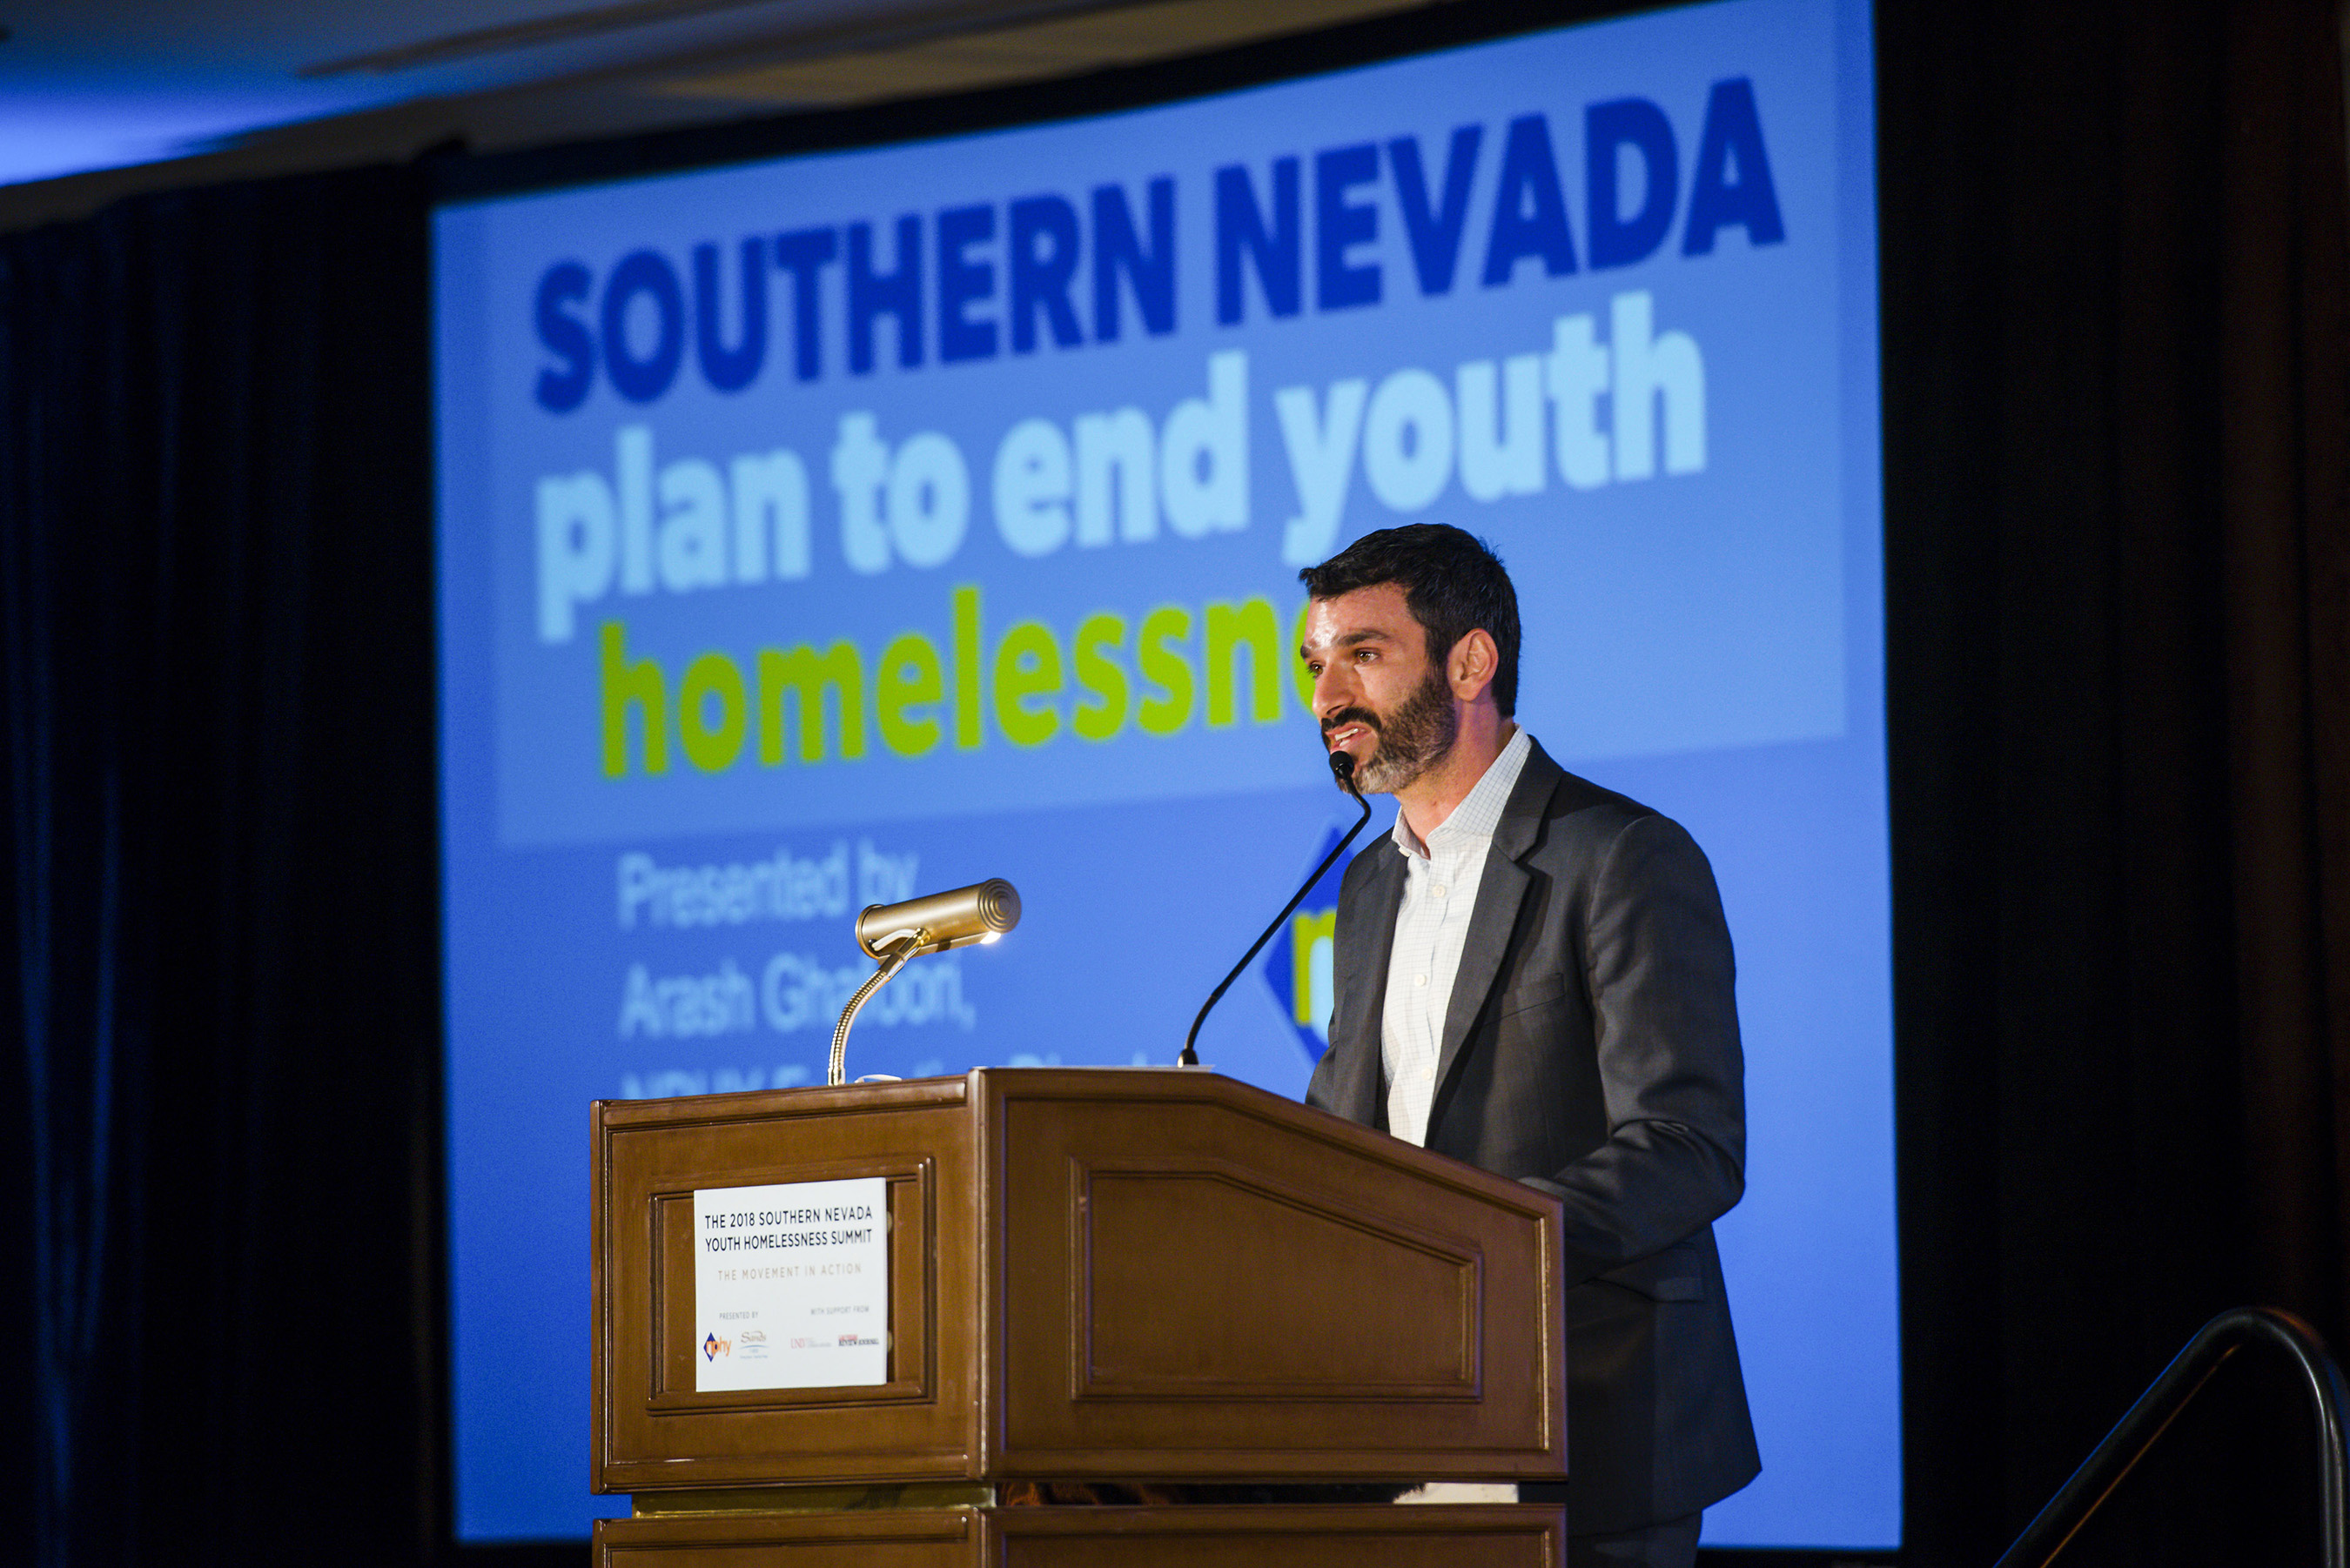 Arash Ghafoori, Executive Director of the Nevada Partnership for Homeless Youth detailed the first-ever Southern Nevada Plan to End Homeless Youth. The Plan was announced at the Southern Nevada Youth Homelessness Summit hosted by Las Vegas Sands and the Nevada Partnership for Homeless Youth.